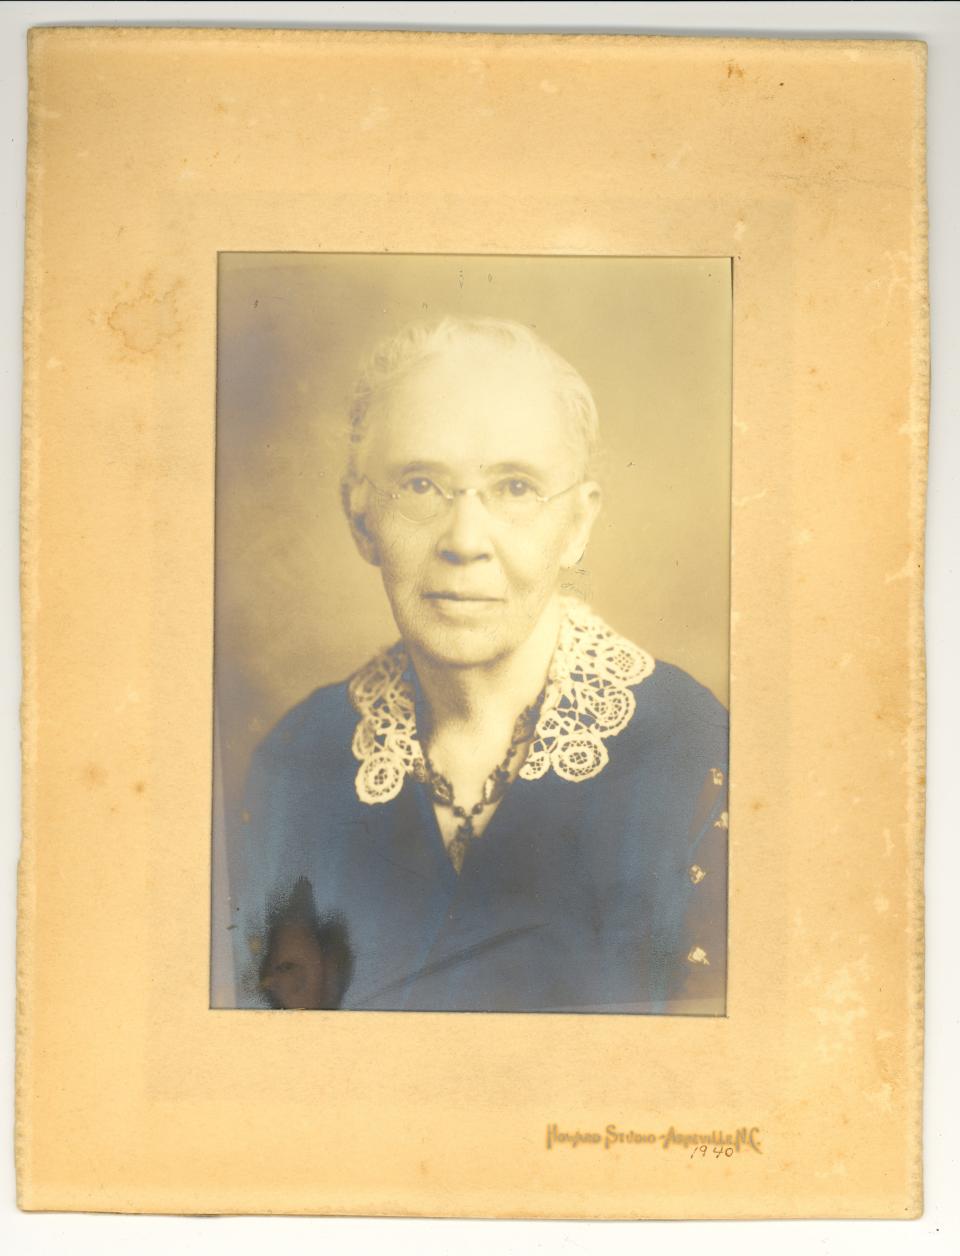 This photographic portrait of Frances Goodrich was taken in 1940 by Howard Studio in Asheville. Goodrich would have been 84 years old at that time.